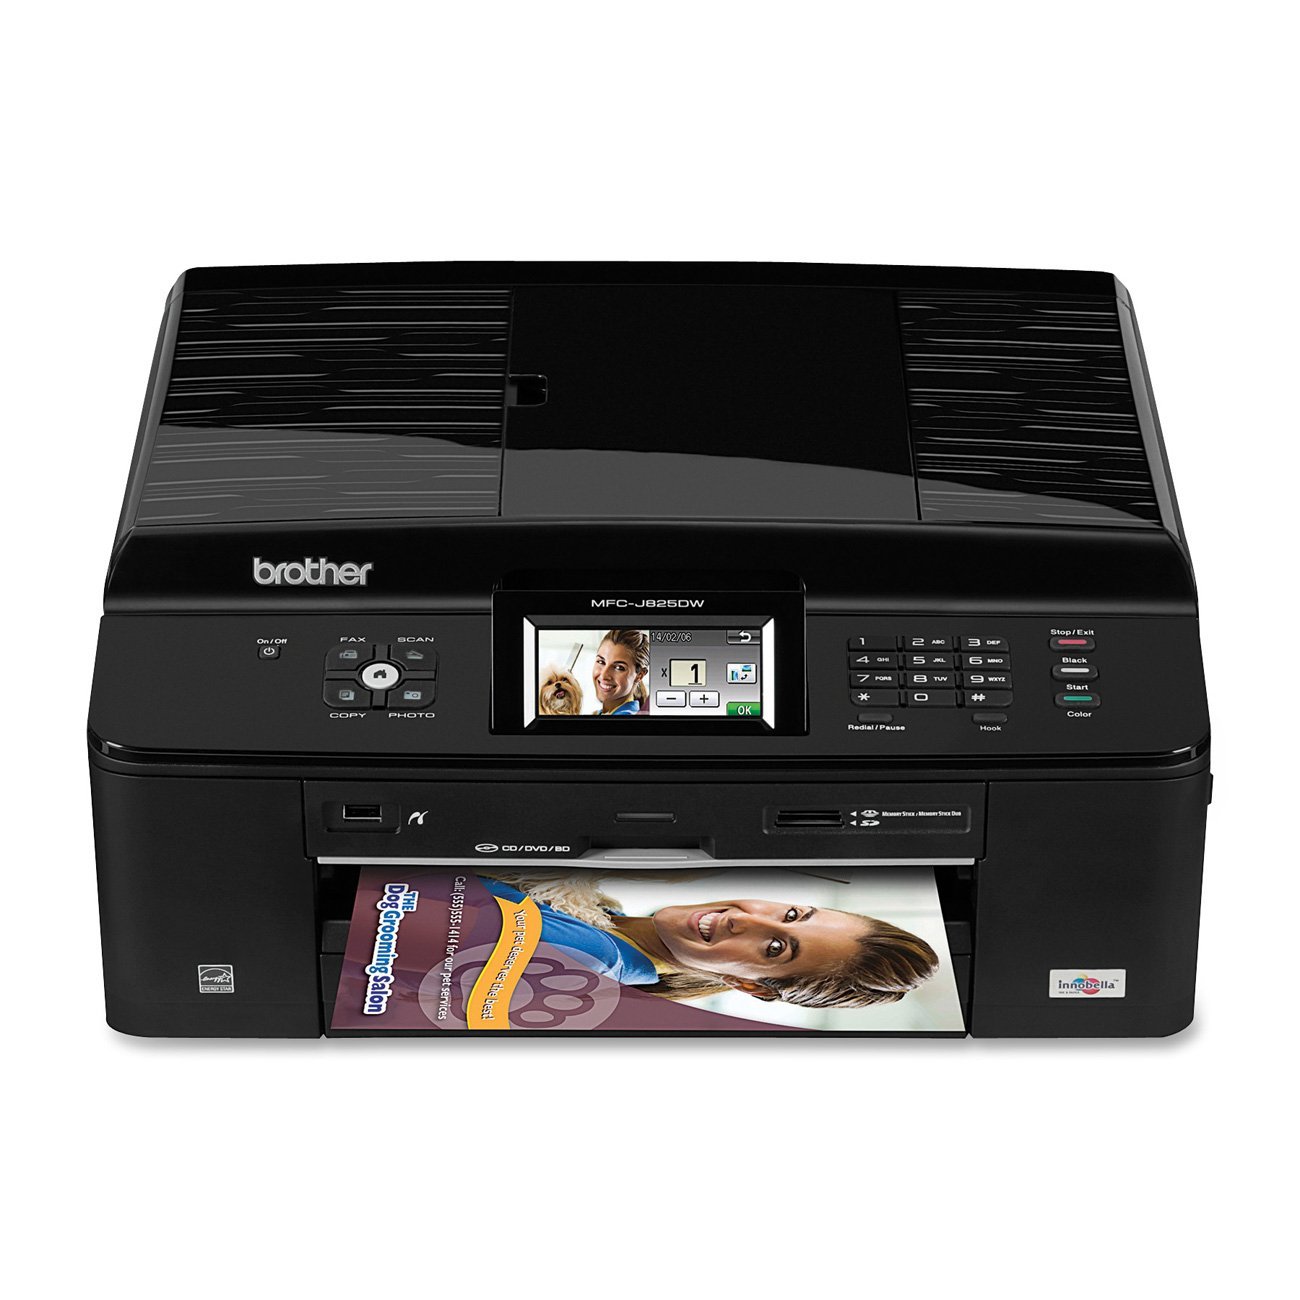 Brother Printer MFCJ825DW Wireless Color Photo Printer with Scanner, Copier and Fax